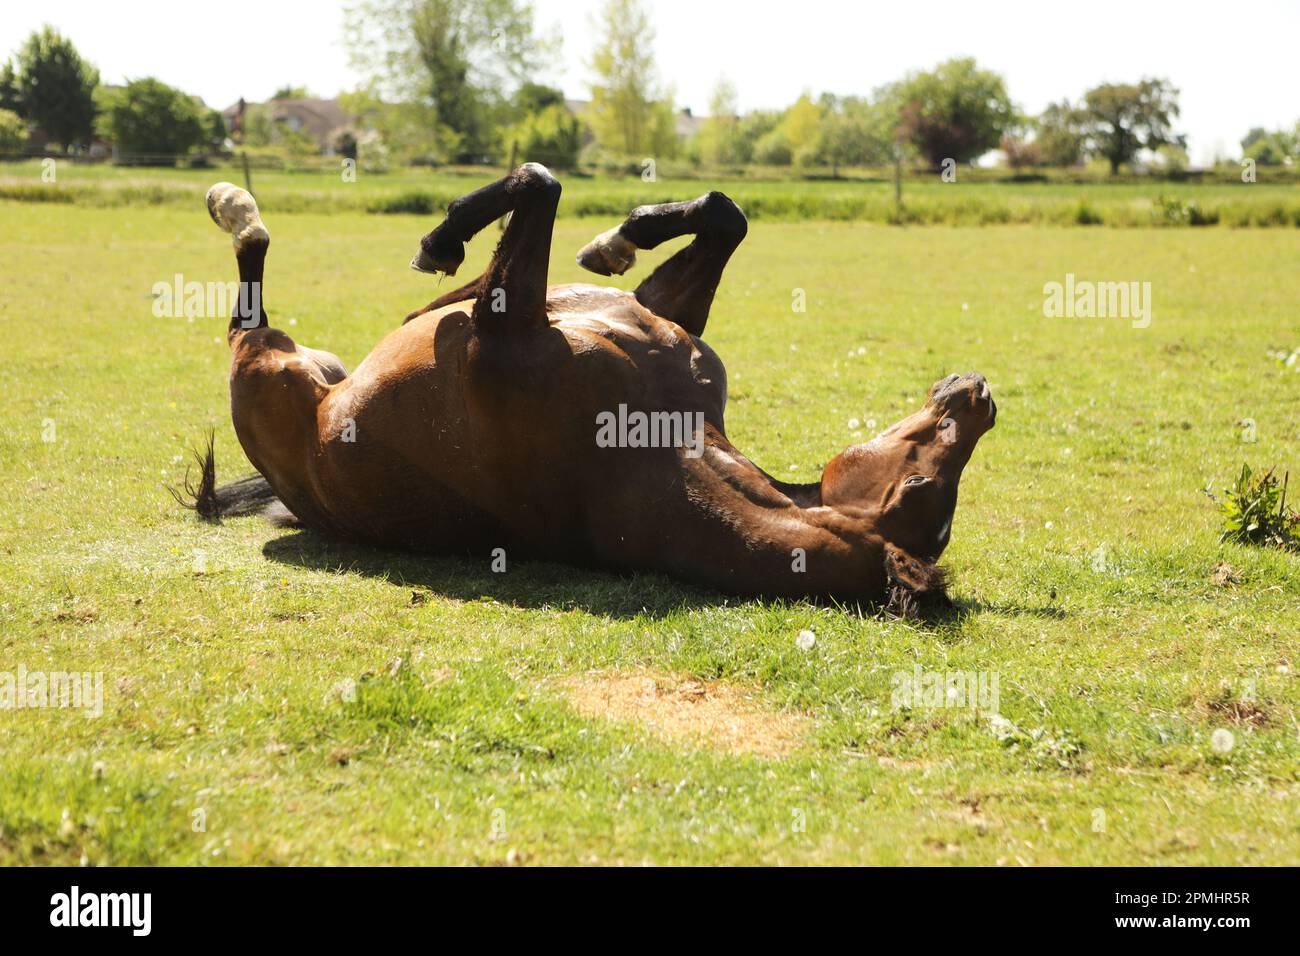 An Arabian horse rolling in the grass in summertime Stock Photo